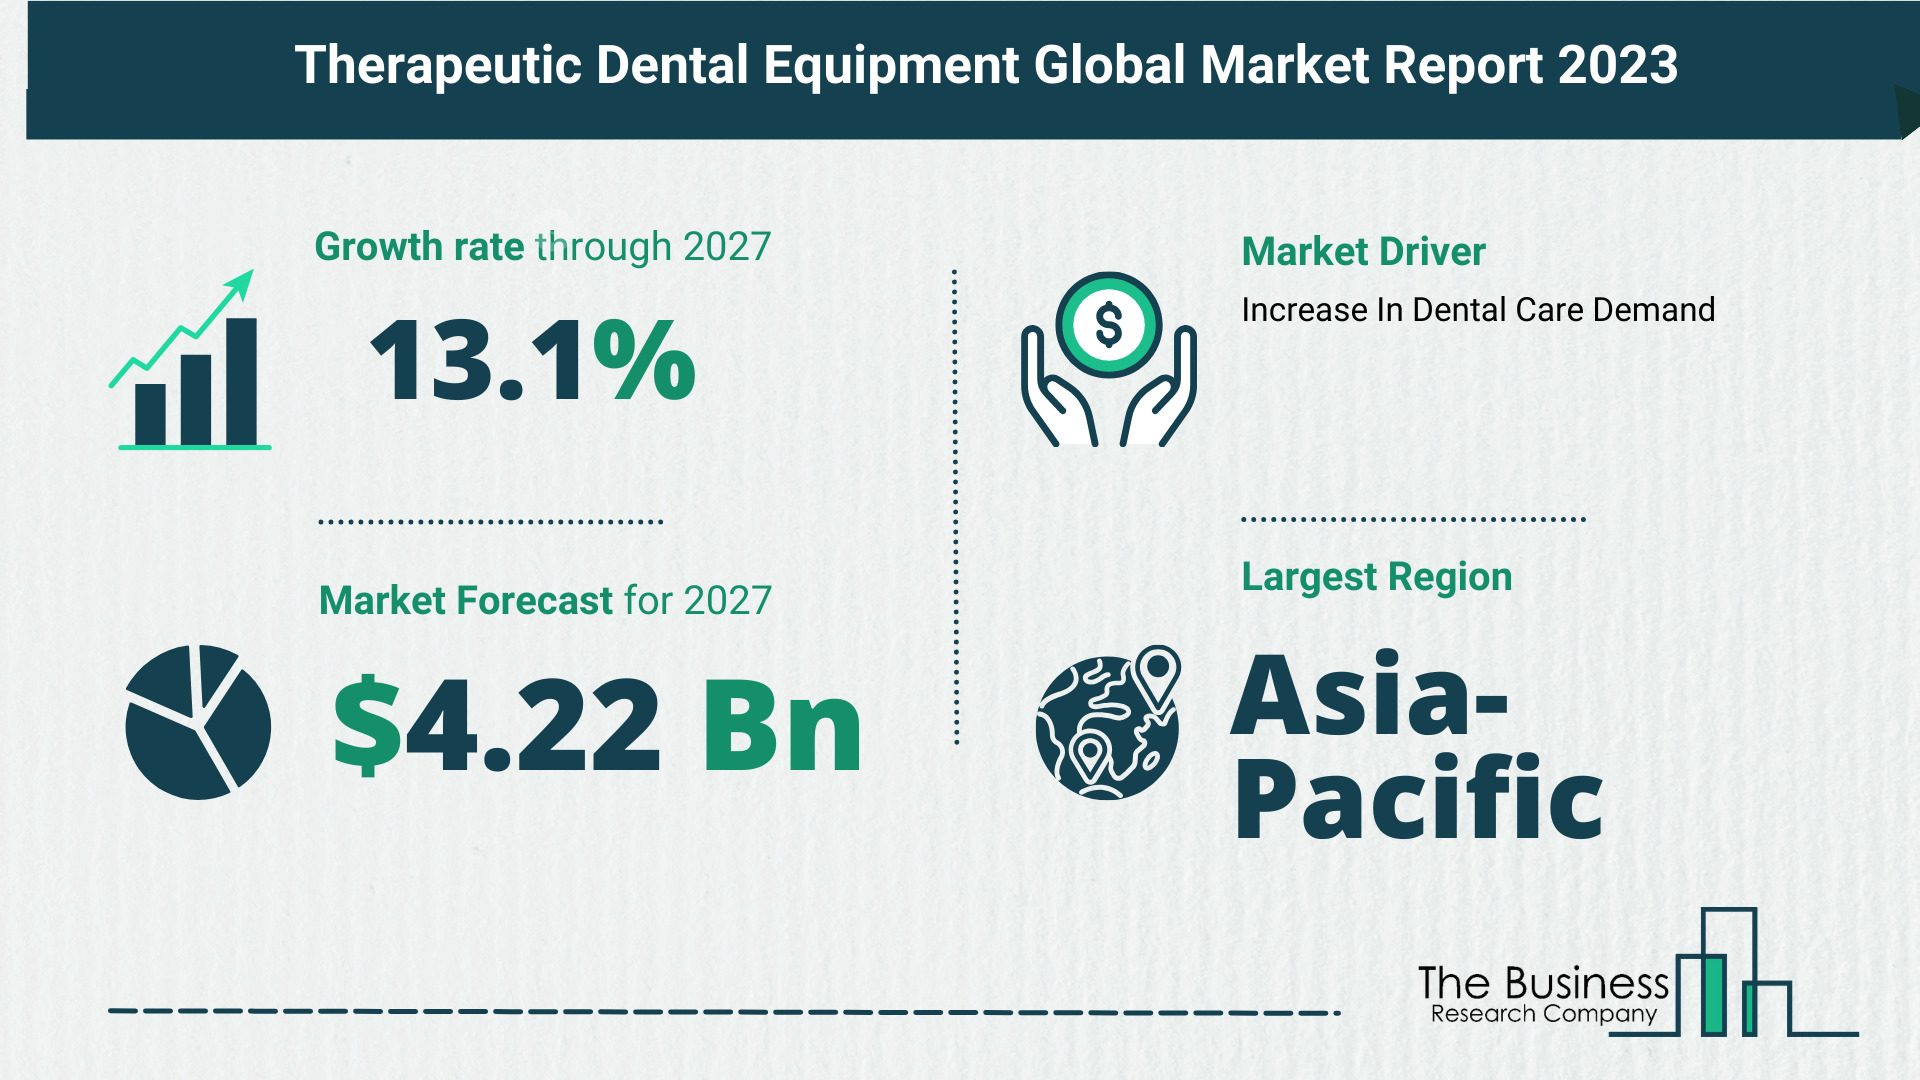 What Is The Forecast Growth Rate For The Therapeutic Dental Equipment Market?